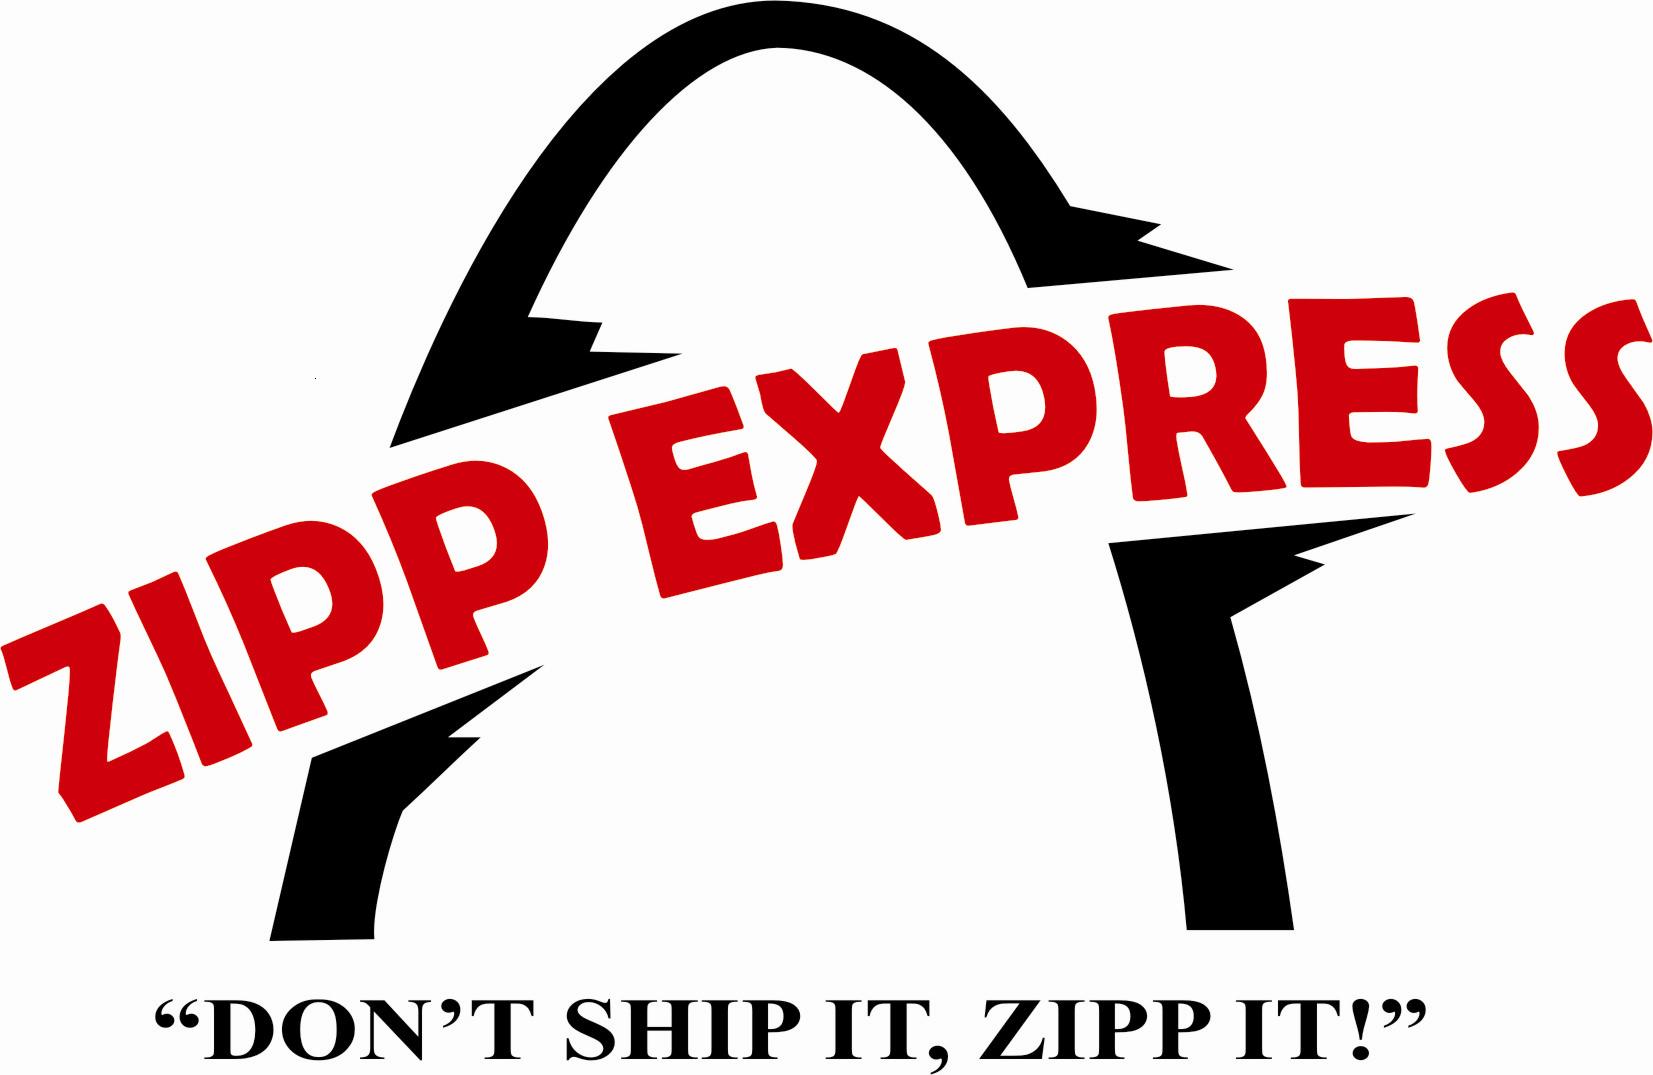 ZIPP Express - Saint Louis, MO | Same-Day Delivery | Drivv - Courierboard